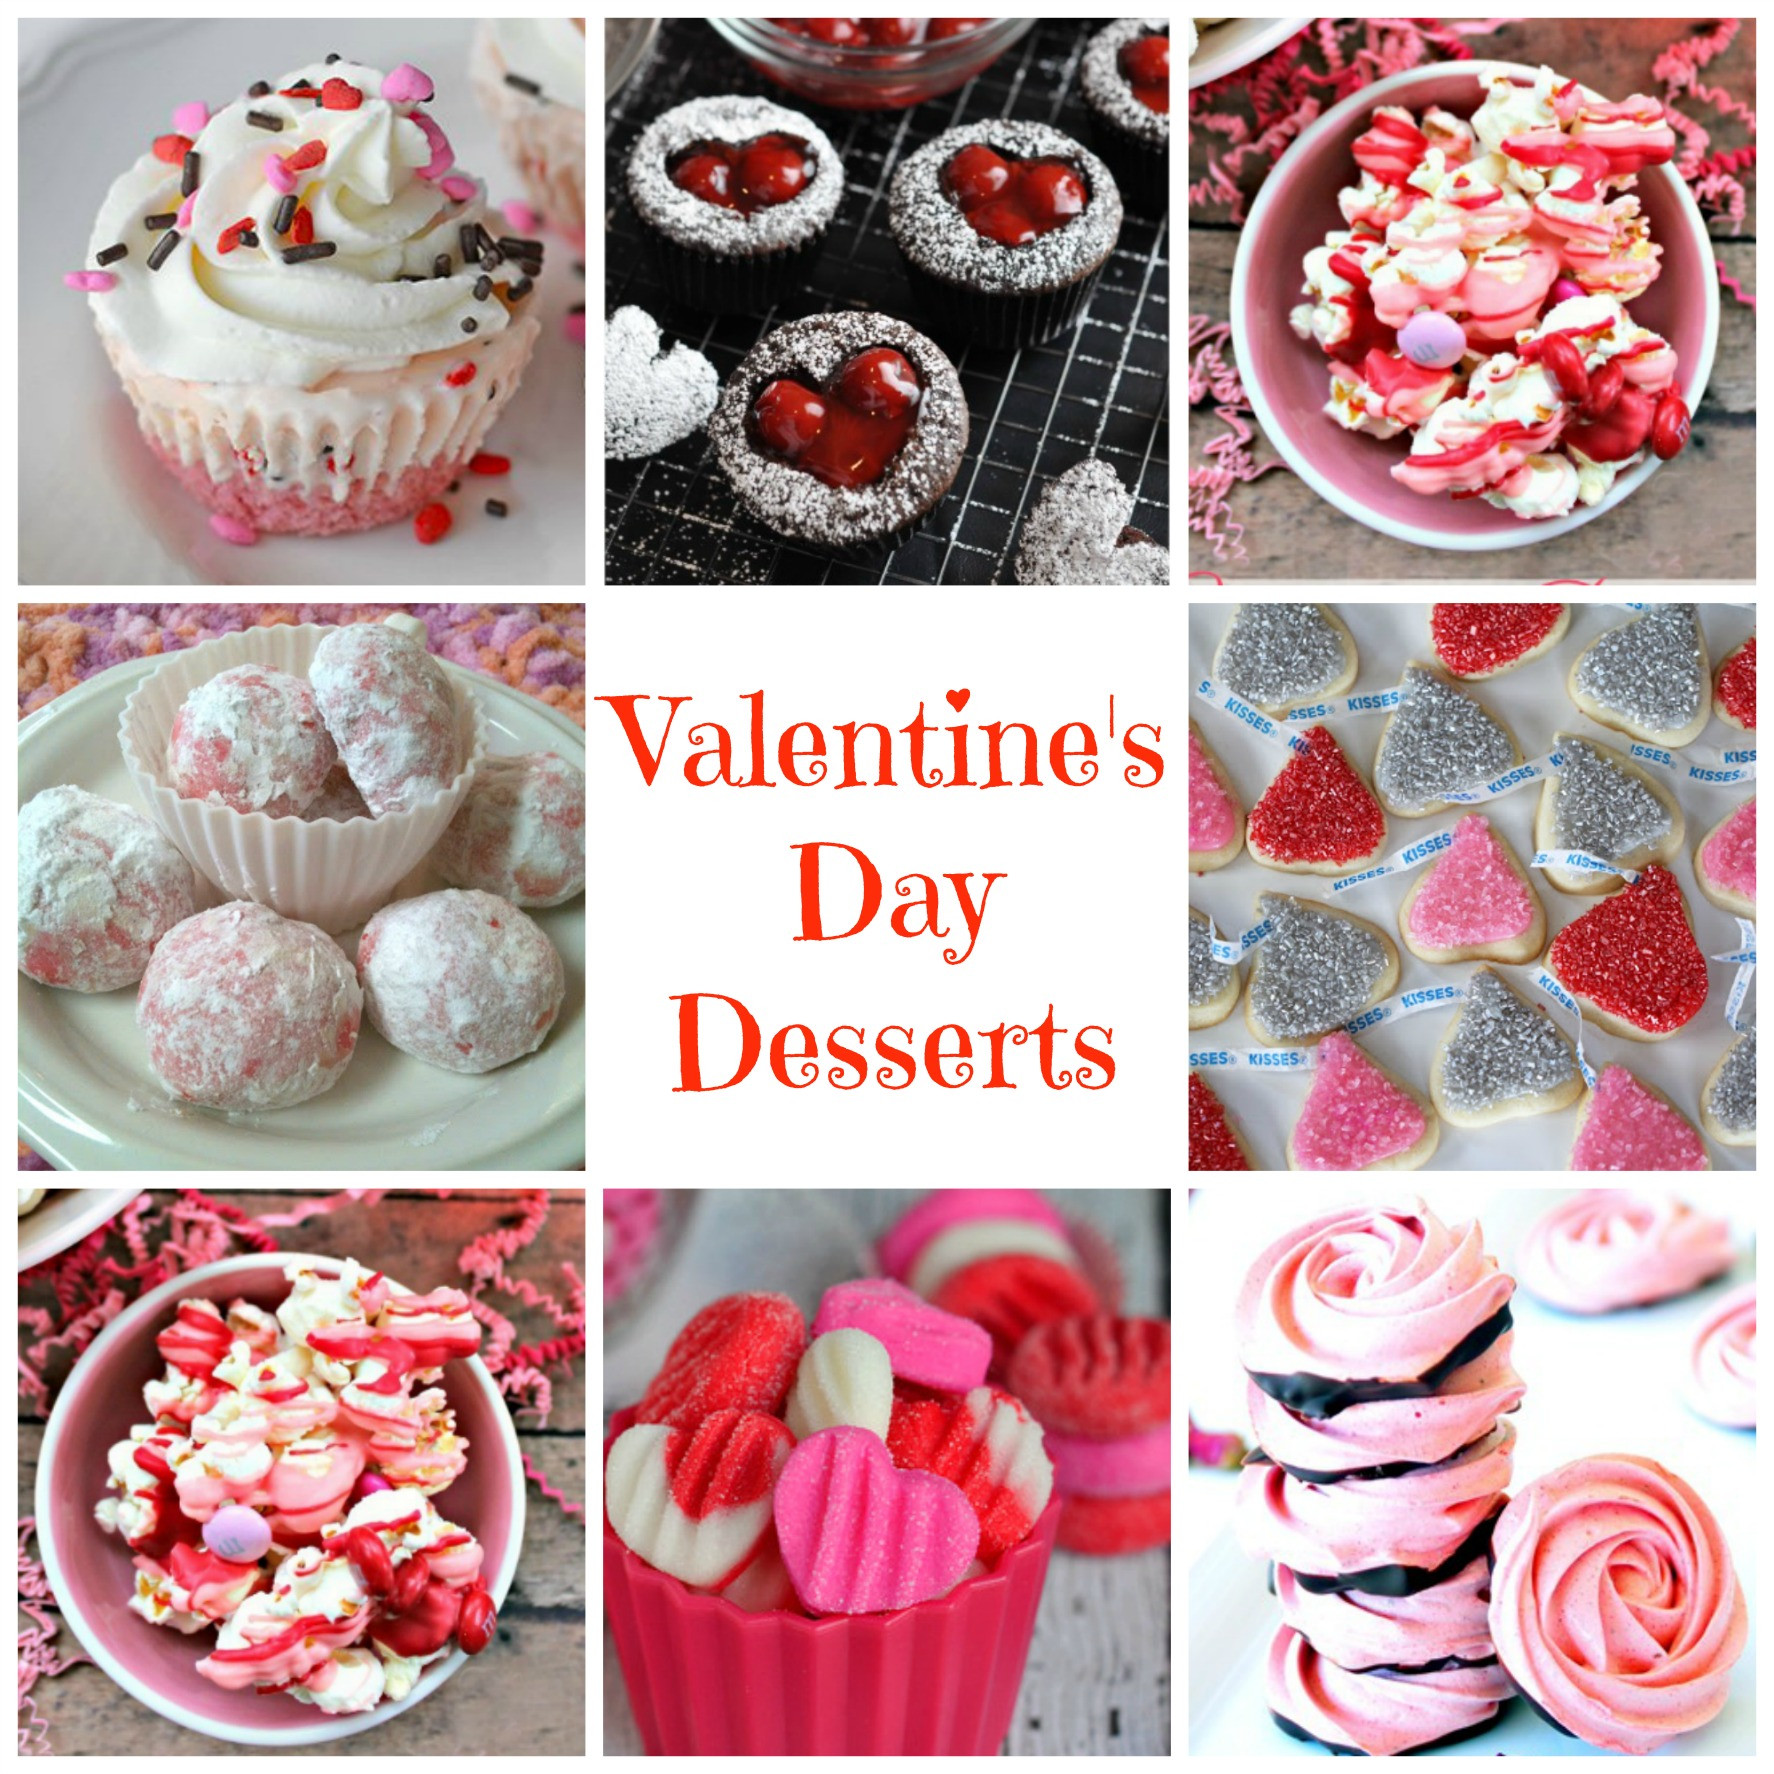 Valentines Desserts Recipes With Pictures
 10 Valentine s Day Desserts Making Time for Mommy